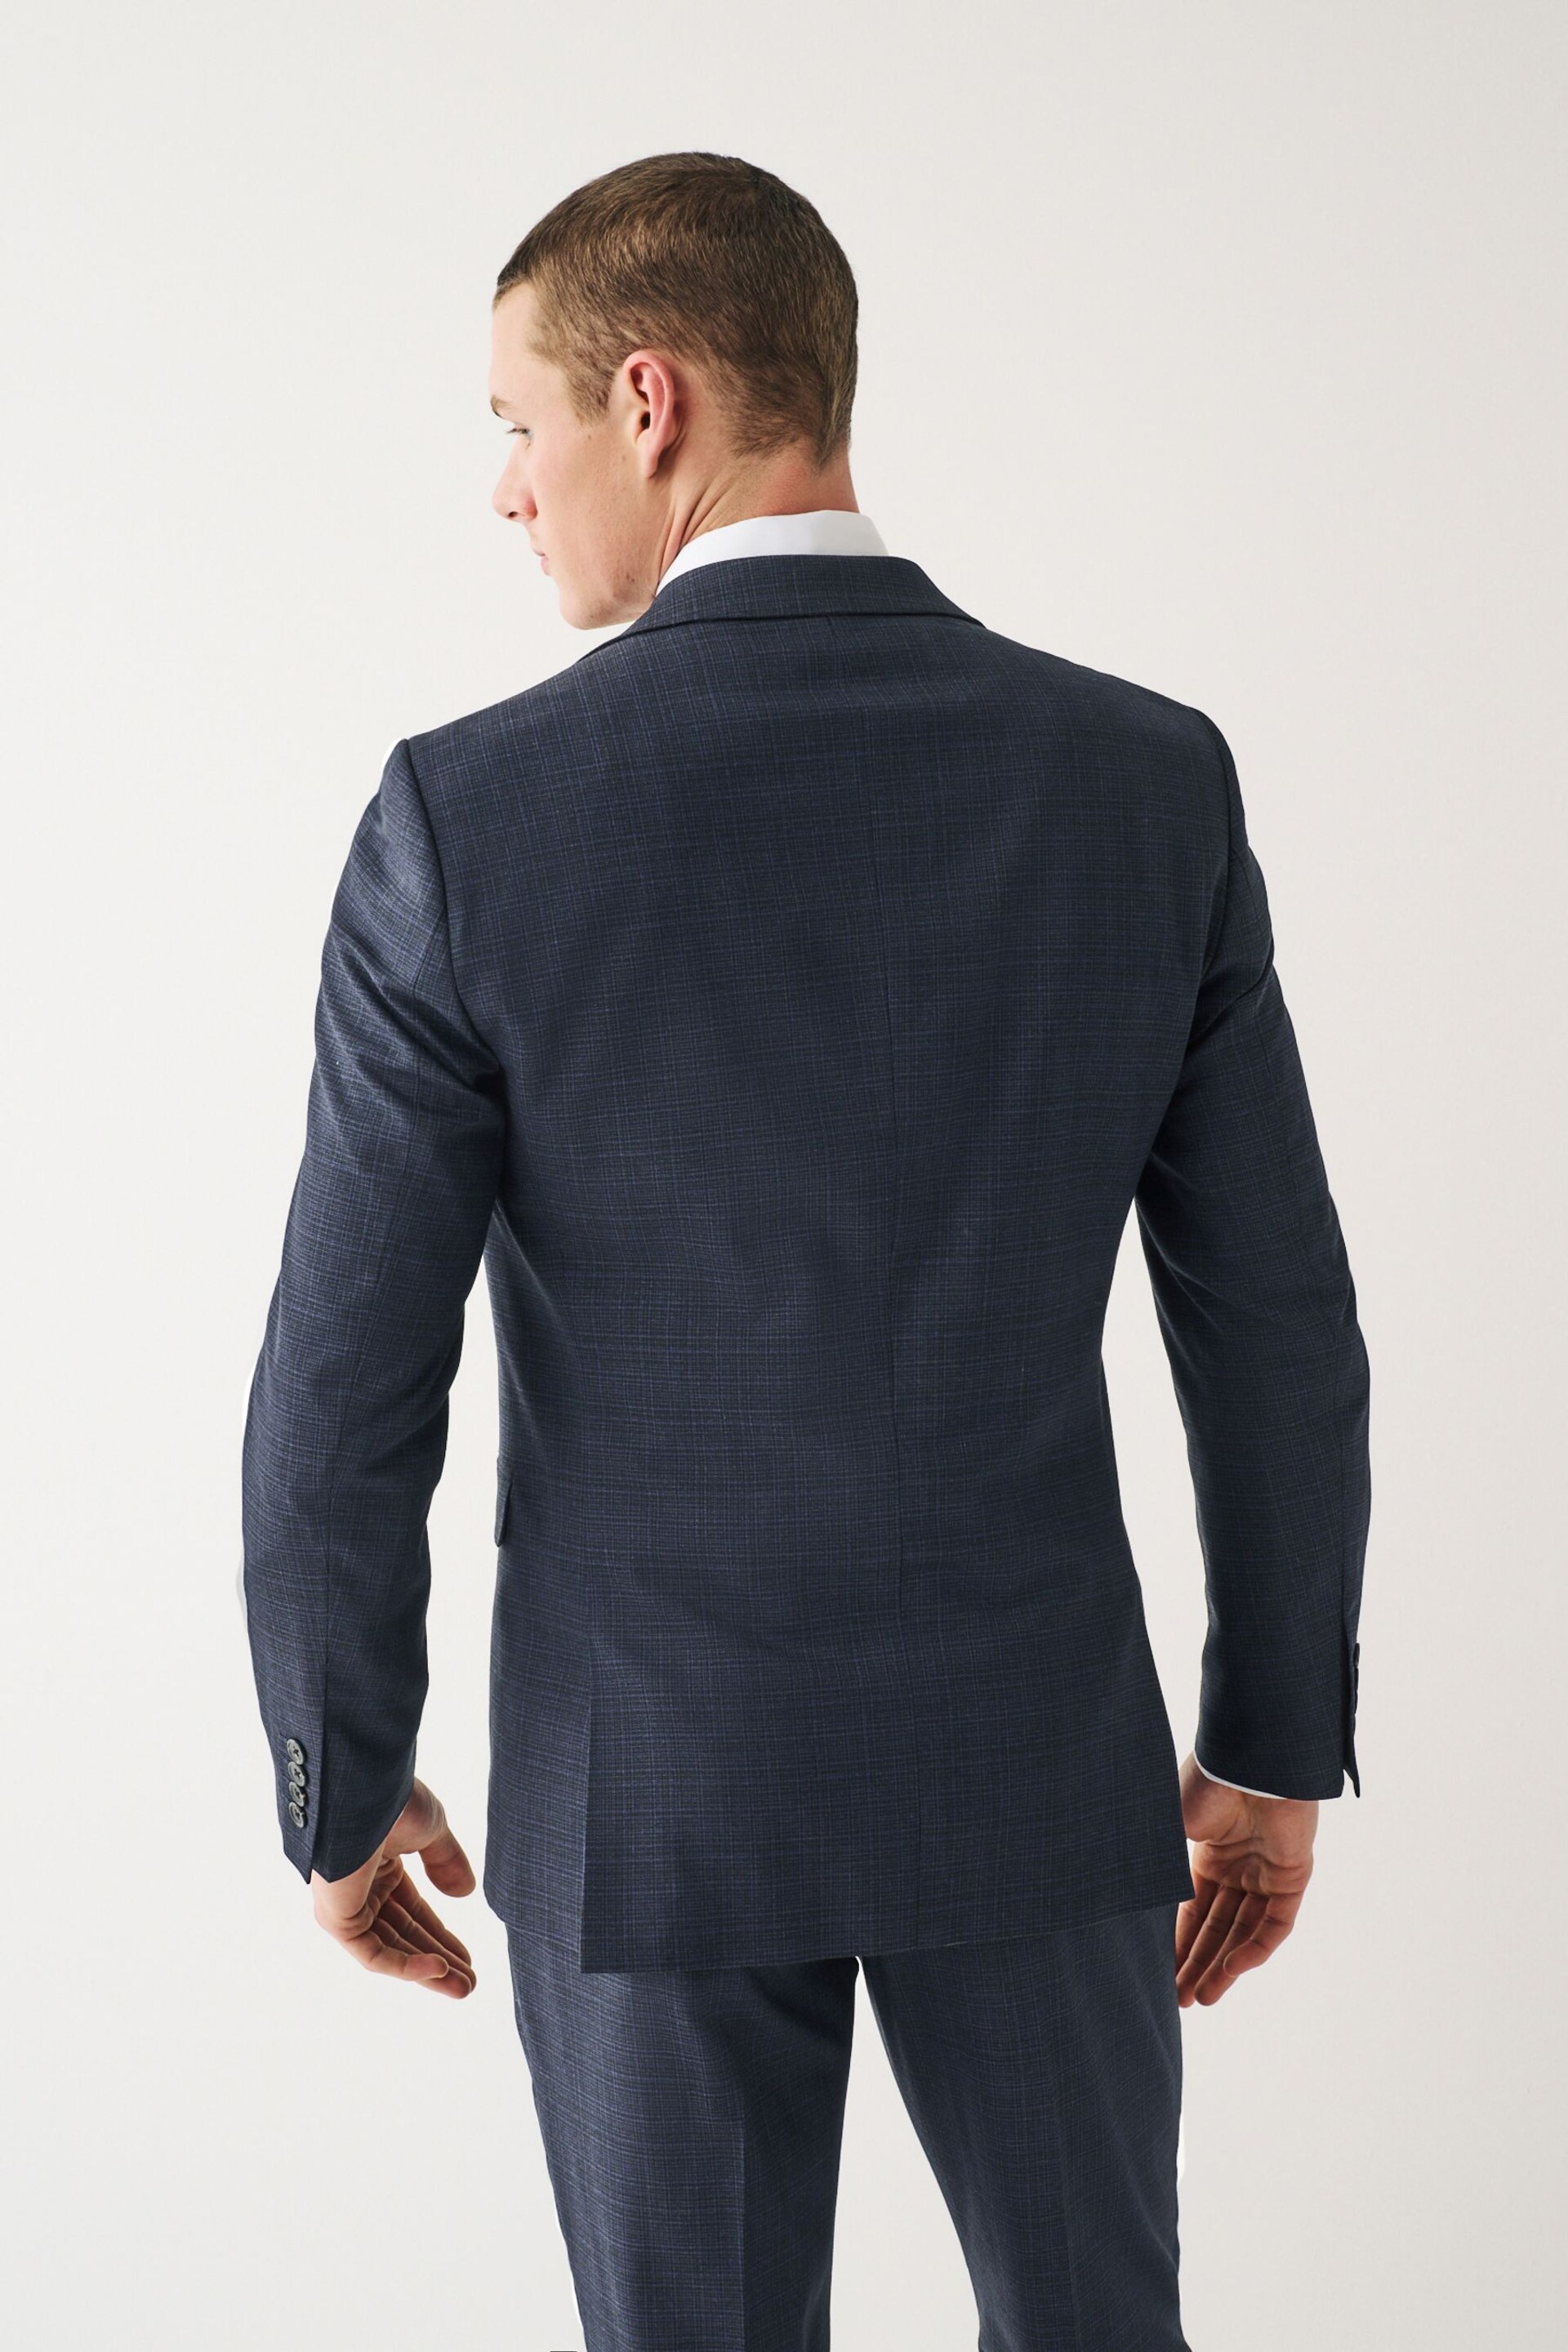 Navy Blue Skinny Check Suit Jacket - Image 2 of 13